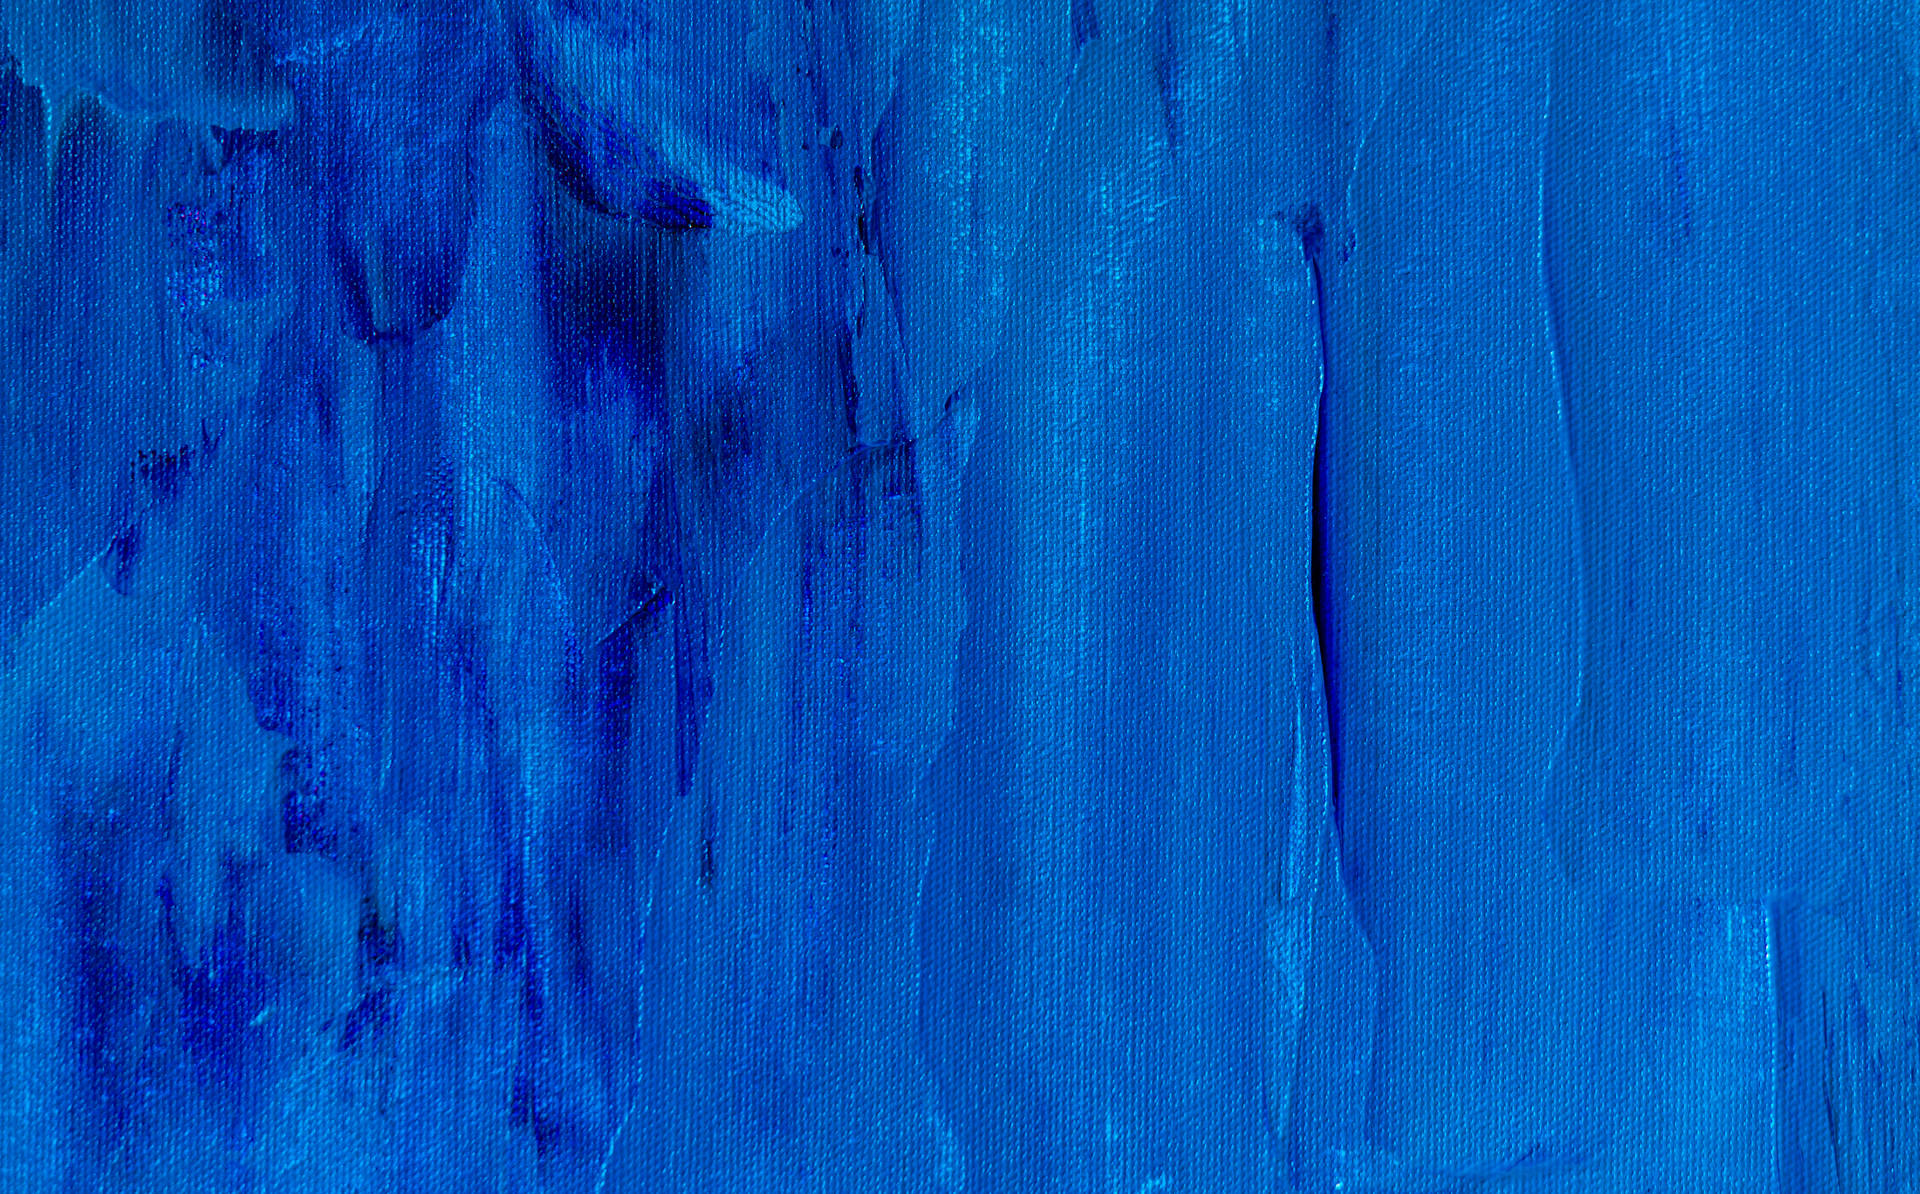 Blue Textured Painting Wallpaper